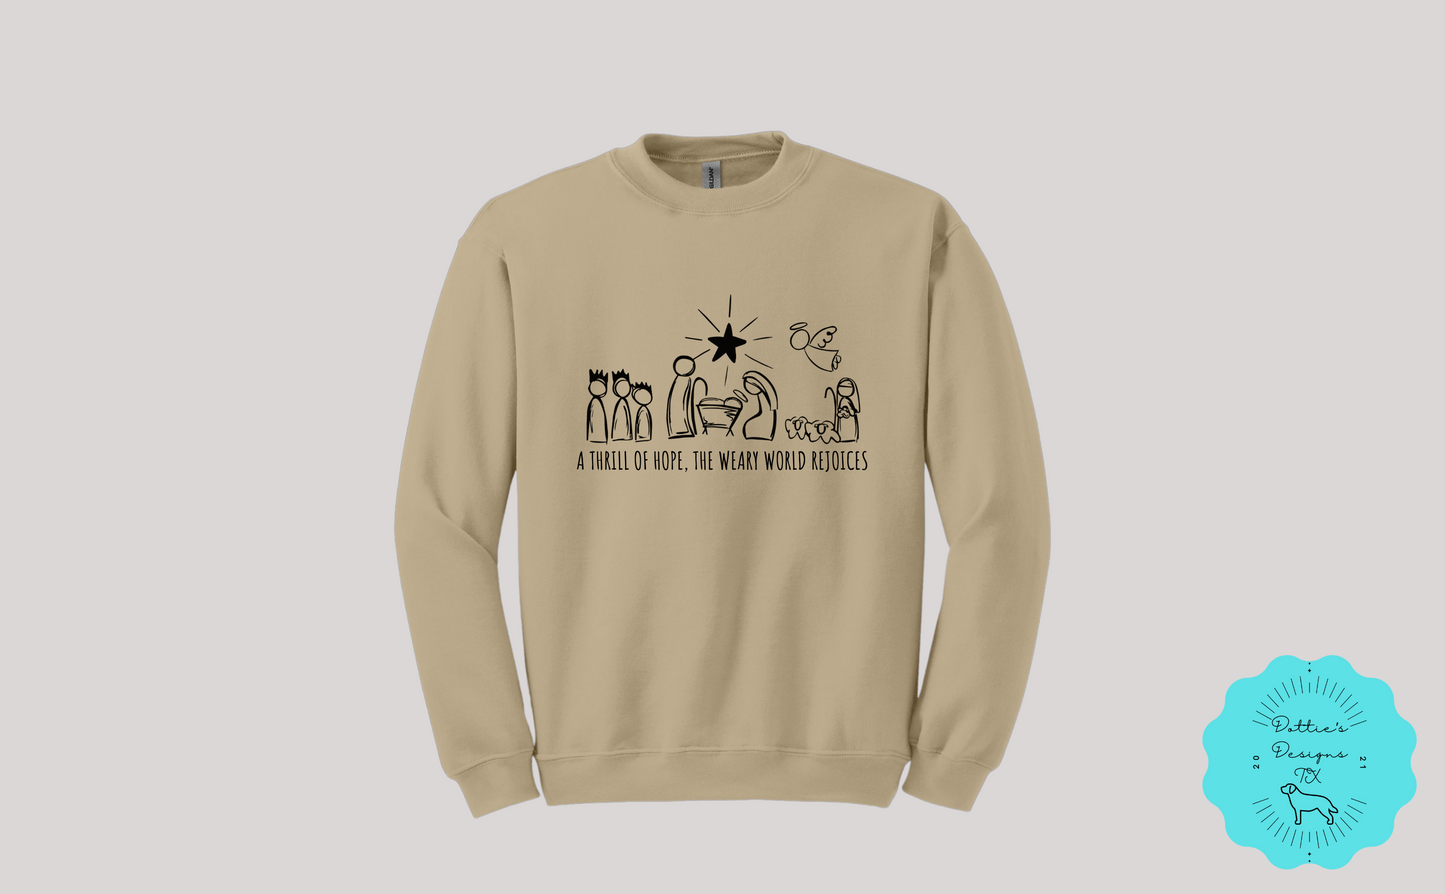 The Thrill of Hope, The Weary World Rejoices Christmas Soft and Cozy Crewneck Fleece